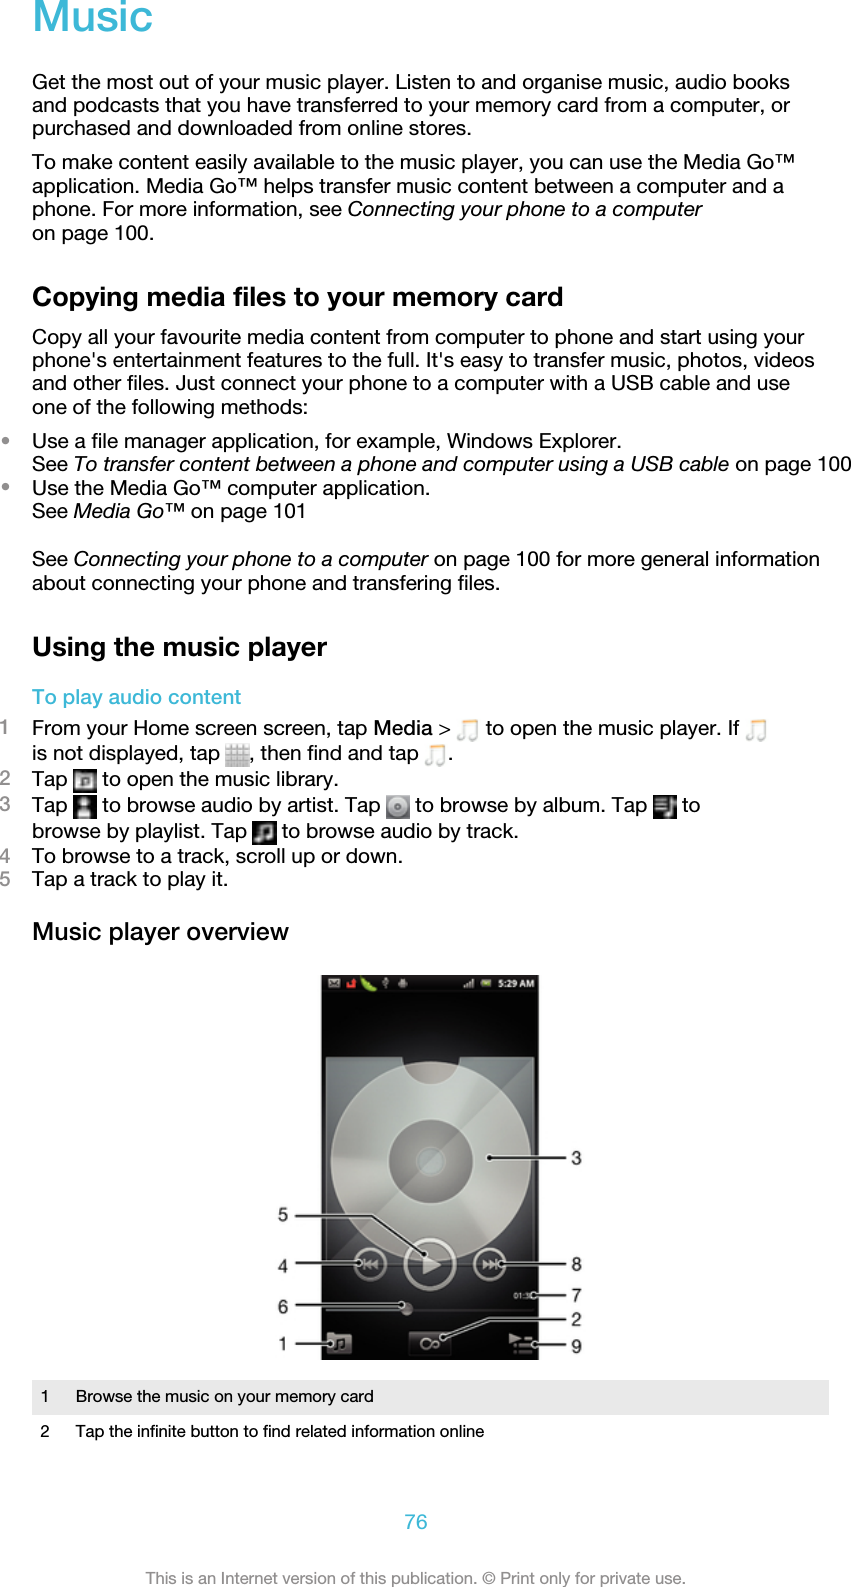 MusicGet the most out of your music player. Listen to and organise music, audio booksand podcasts that you have transferred to your memory card from a computer, orpurchased and downloaded from online stores.To make content easily available to the music player, you can use the Media Go™application. Media Go™ helps transfer music content between a computer and aphone. For more information, see Connecting your phone to a computeron page 100.Copying media files to your memory cardCopy all your favourite media content from computer to phone and start using yourphone&apos;s entertainment features to the full. It&apos;s easy to transfer music, photos, videosand other files. Just connect your phone to a computer with a USB cable and useone of the following methods:•Use a file manager application, for example, Windows Explorer.See To transfer content between a phone and computer using a USB cable on page 100•Use the Media Go™ computer application.See Media Go™ on page 101See Connecting your phone to a computer on page 100 for more general informationabout connecting your phone and transfering files.Using the music playerTo play audio content1From your Home screen screen, tap Media &gt;   to open the music player. If is not displayed, tap  , then find and tap  .2Tap   to open the music library.3Tap   to browse audio by artist. Tap   to browse by album. Tap   tobrowse by playlist. Tap   to browse audio by track.4To browse to a track, scroll up or down.5Tap a track to play it.Music player overview1 Browse the music on your memory card2 Tap the infinite button to find related information online76This is an Internet version of this publication. © Print only for private use.